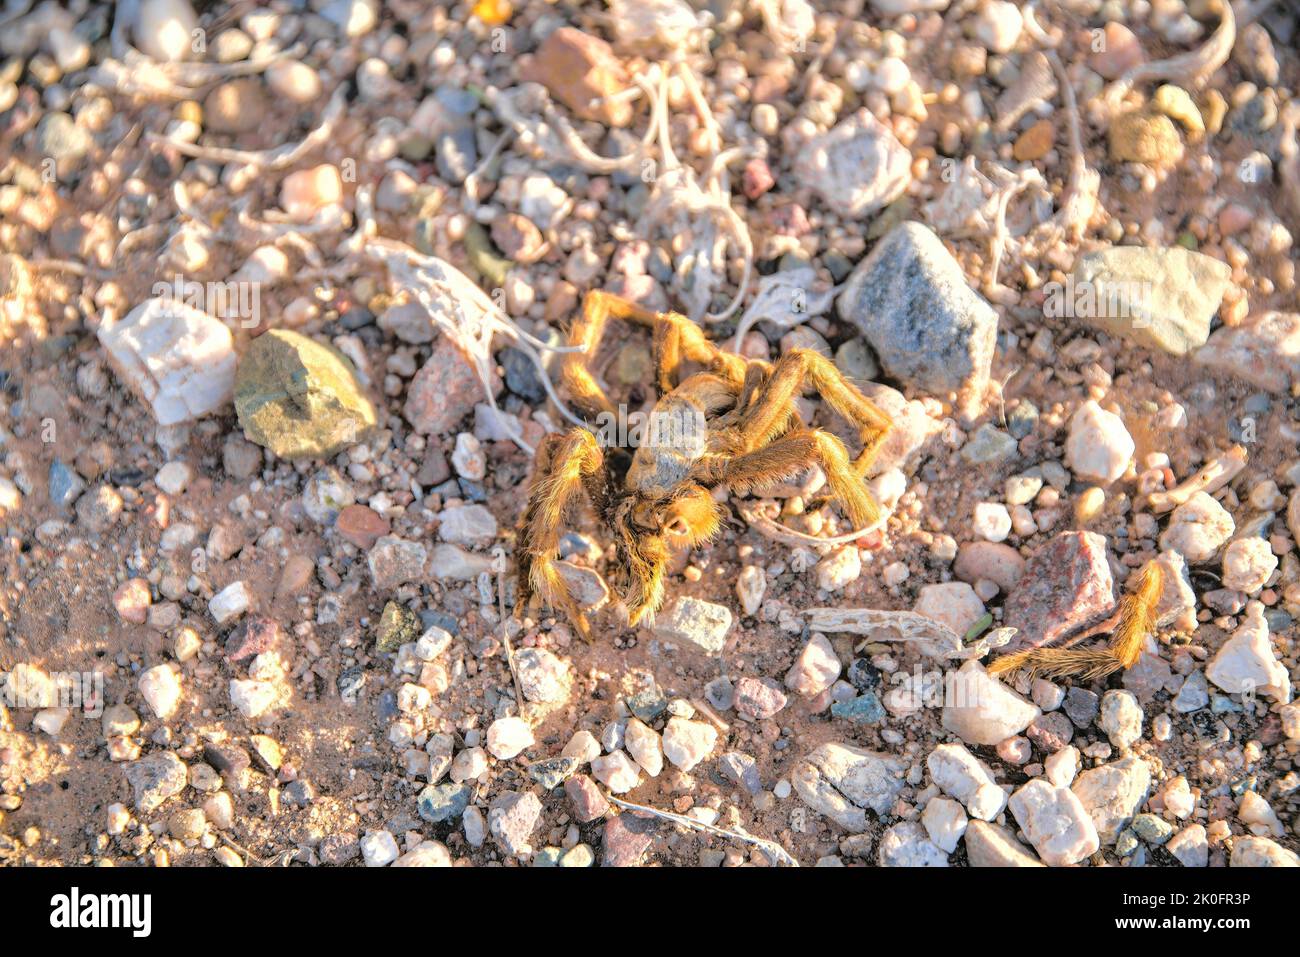 Tarantula with one leg separated on the side at Tucson, Arizona. Dead tarantula in a close-up view against the dry rocky ground background. Stock Photo